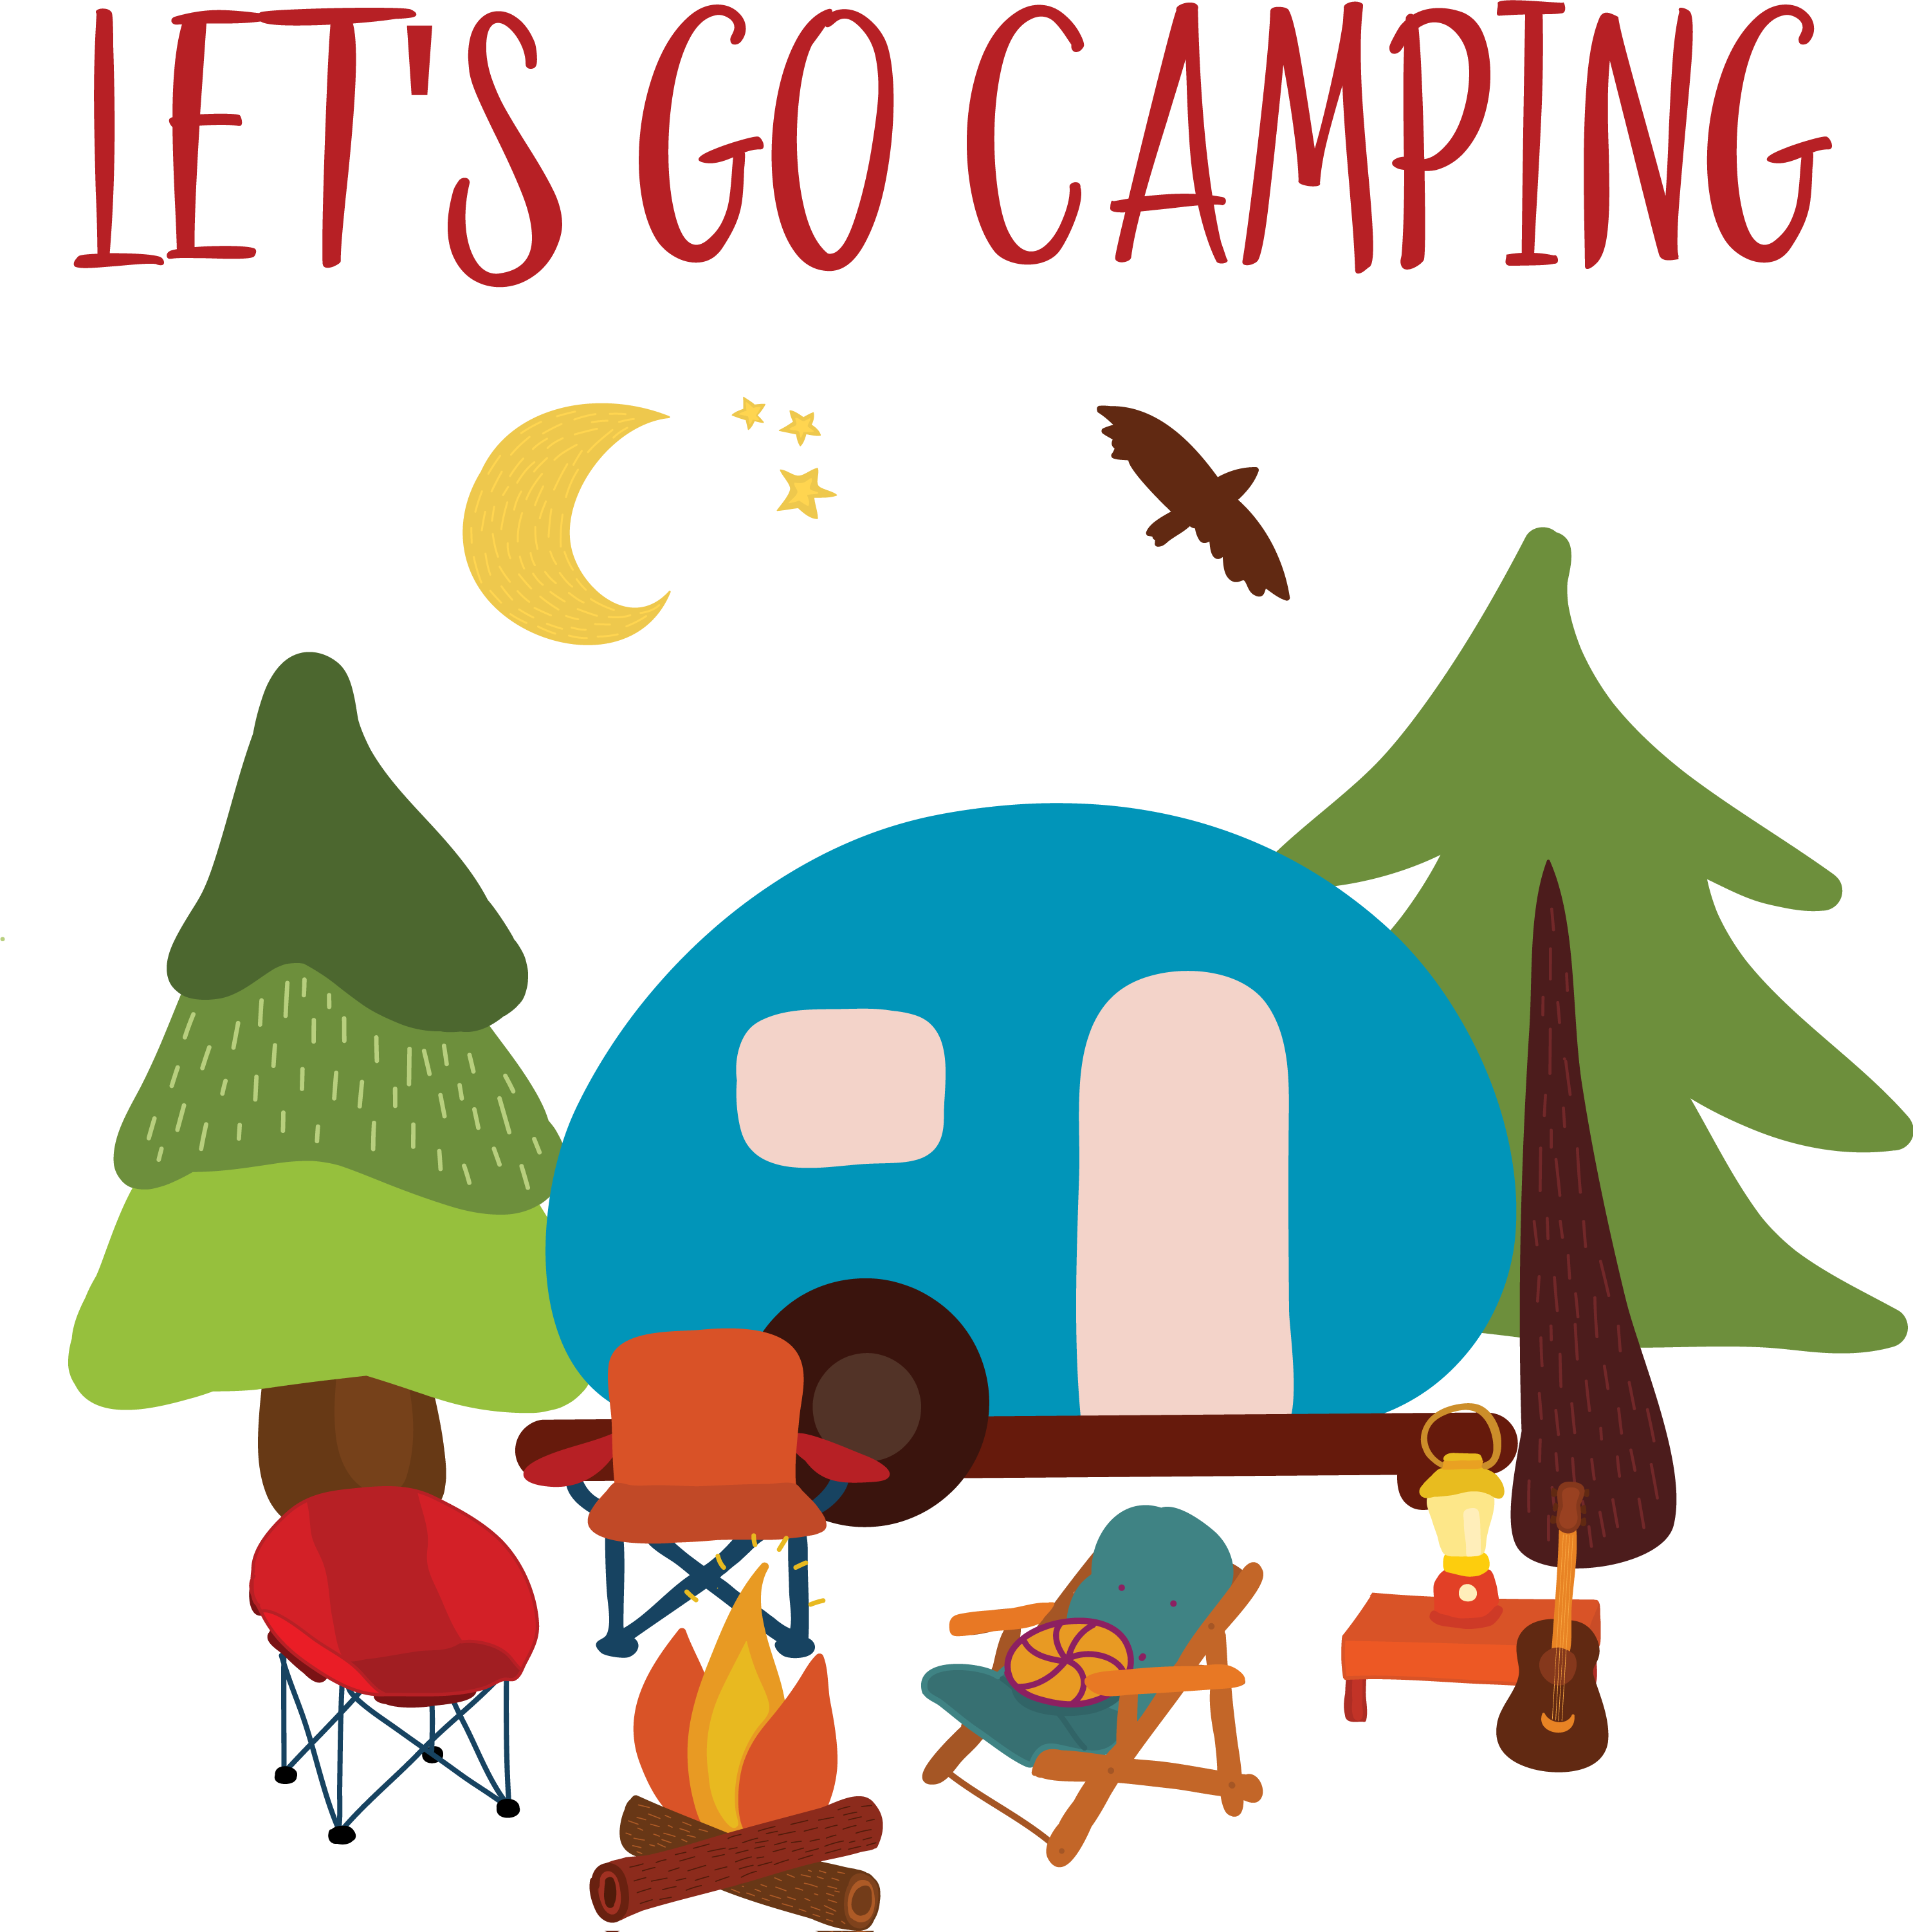 We Have Everything You And Your Family Will Need To - Lets Go Camping (2974x3003)